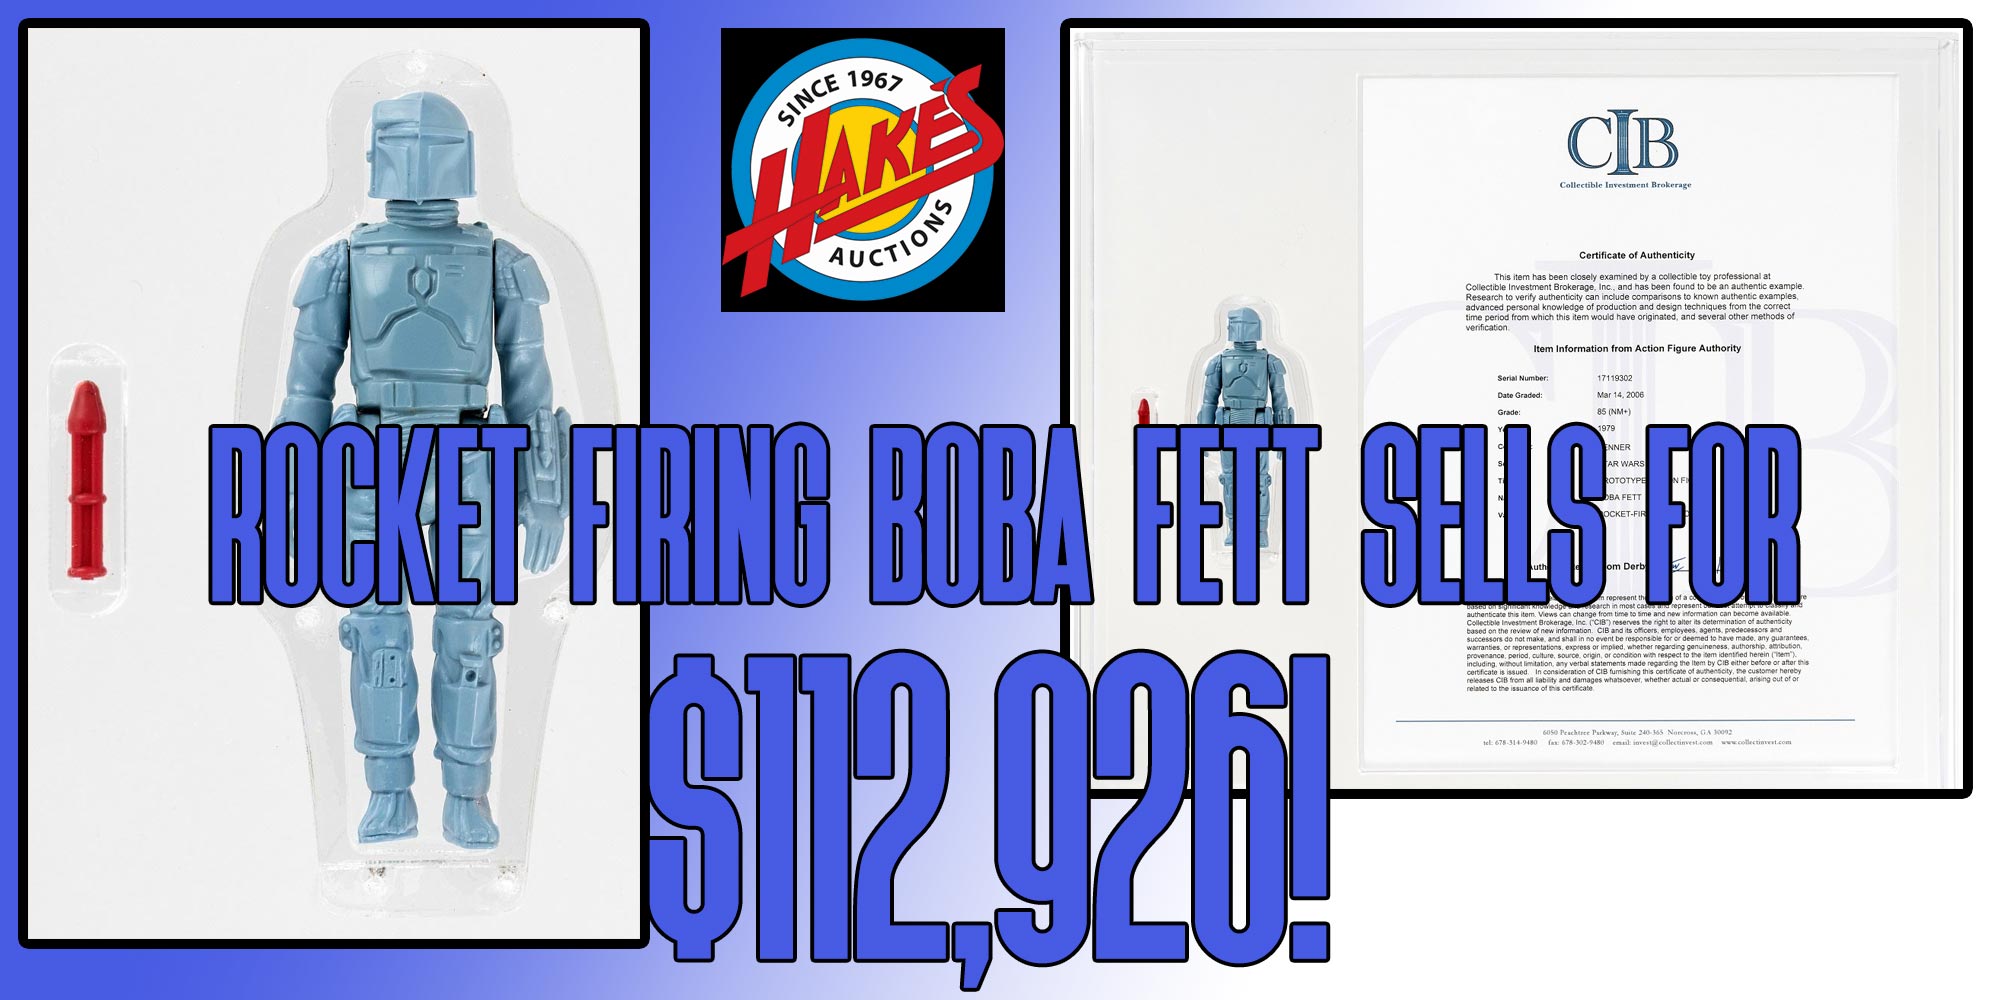 Hake’s Auctions Sells Rare Star Wars Action Figure For $112,926